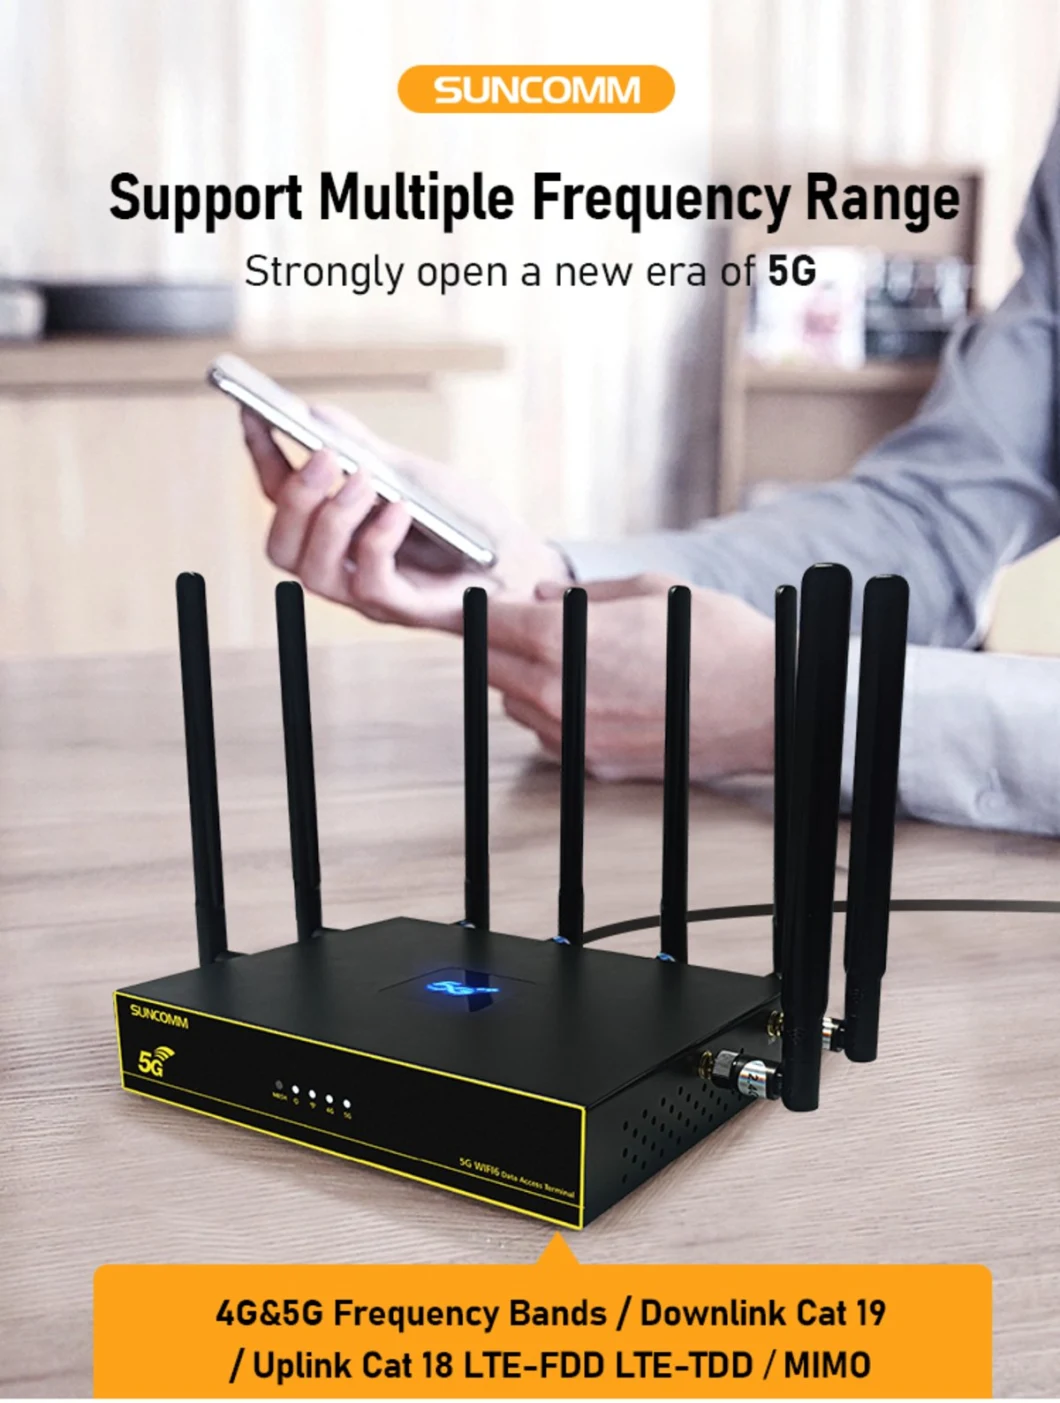 Hot Selling 5g CPE WiFi Router with SIM Card Slot External Antenna Suncomm O2 Mesh Home Enterprise Routeur Modem 5g